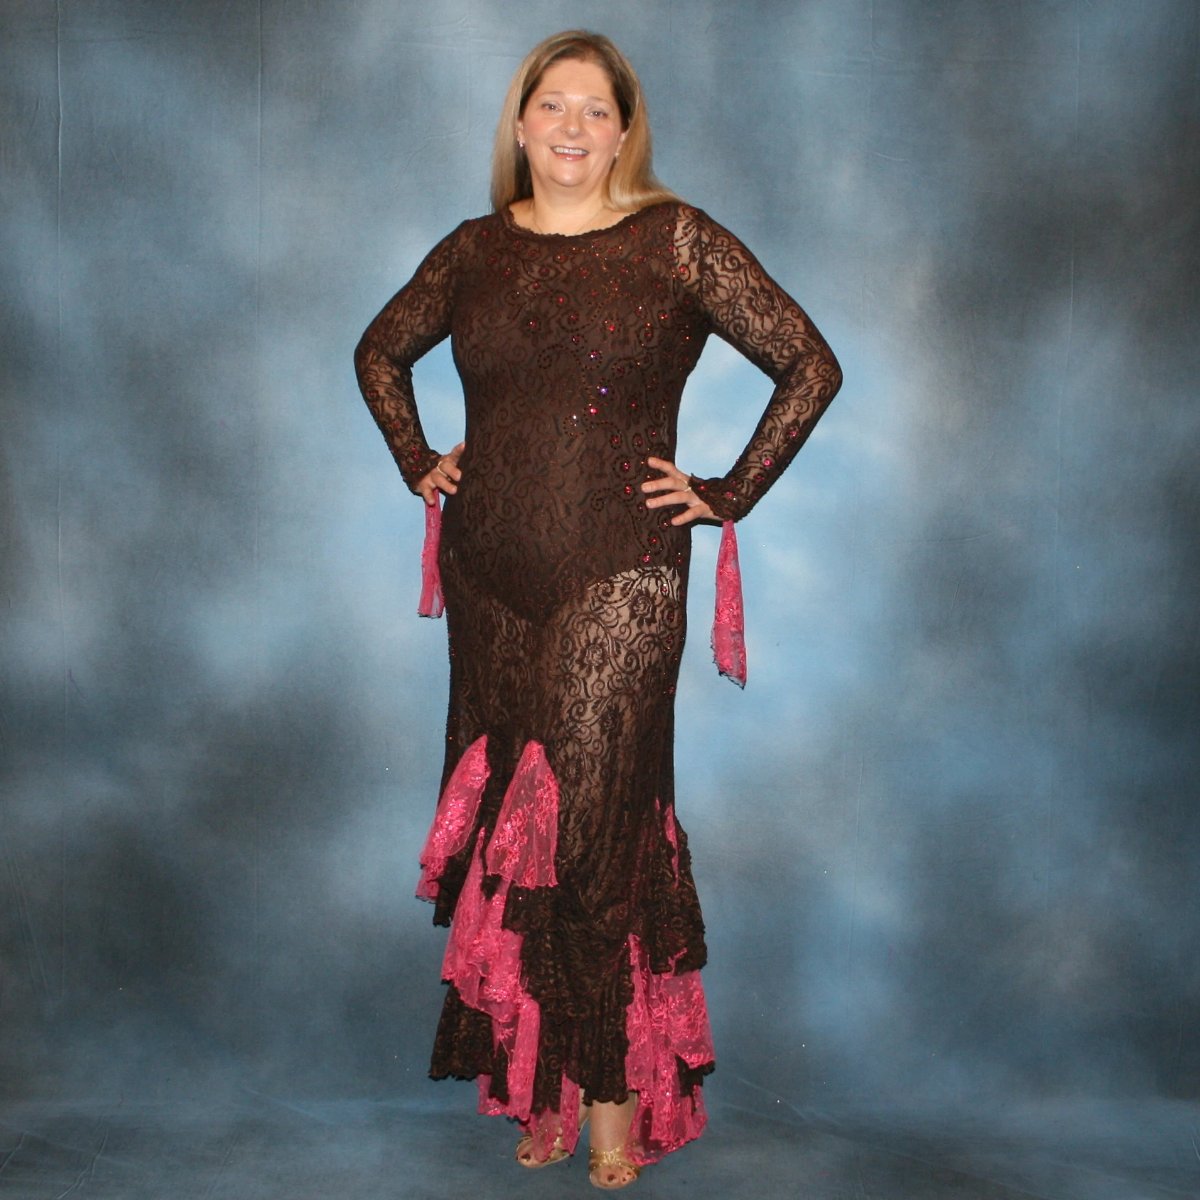 Crystal's Creations Brown lace tango dress, fabulous bolero dress or rumba dress created in luxurious chocolate brown stretch lace with accent flounces of a deep pink glitter lace, embellished with Swarovski rhinestone detail work in copper & fuschia. 